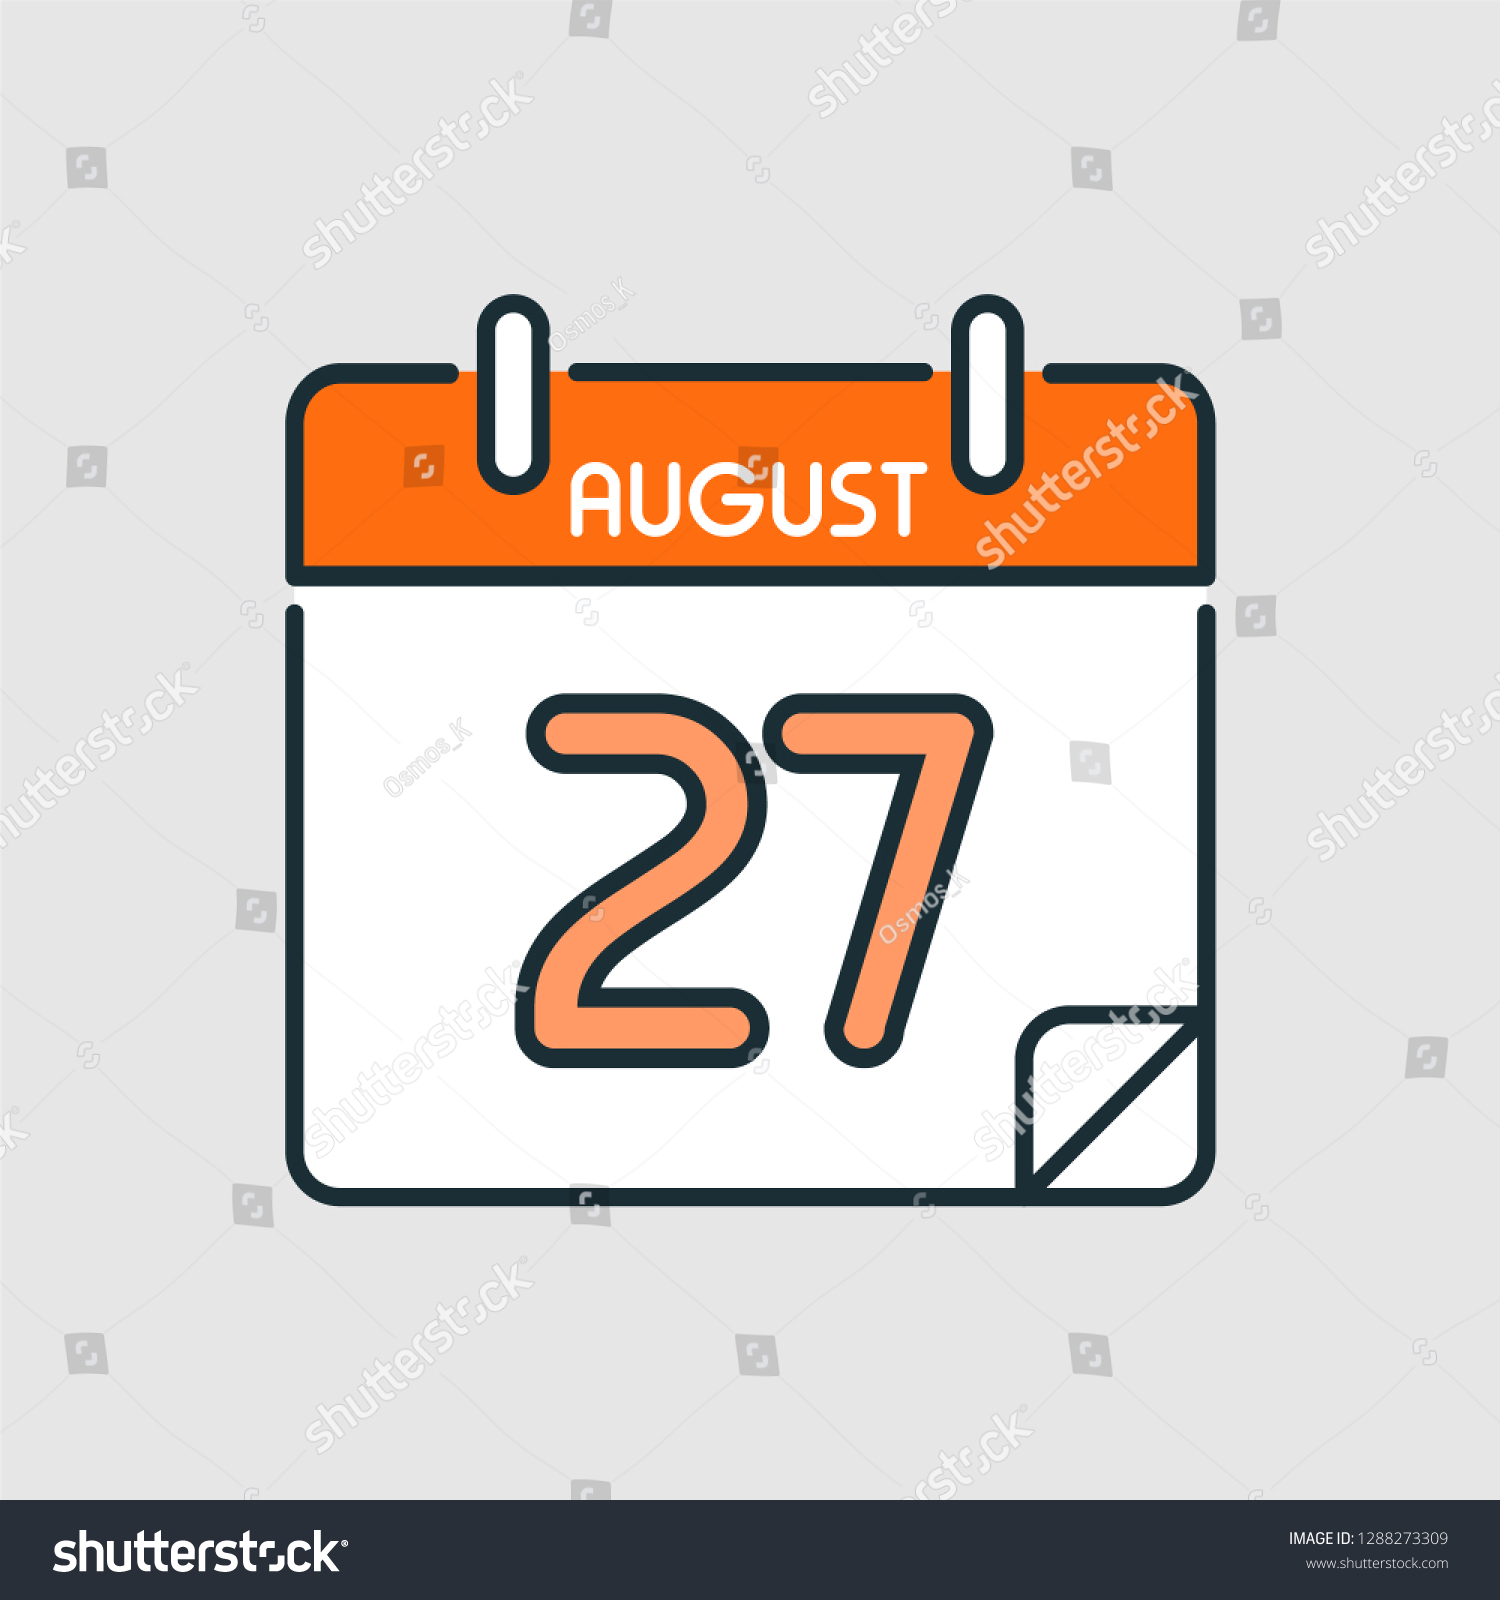 SVG of August 27. Flat icon calendar isolated on gray background. Vector illustration. svg